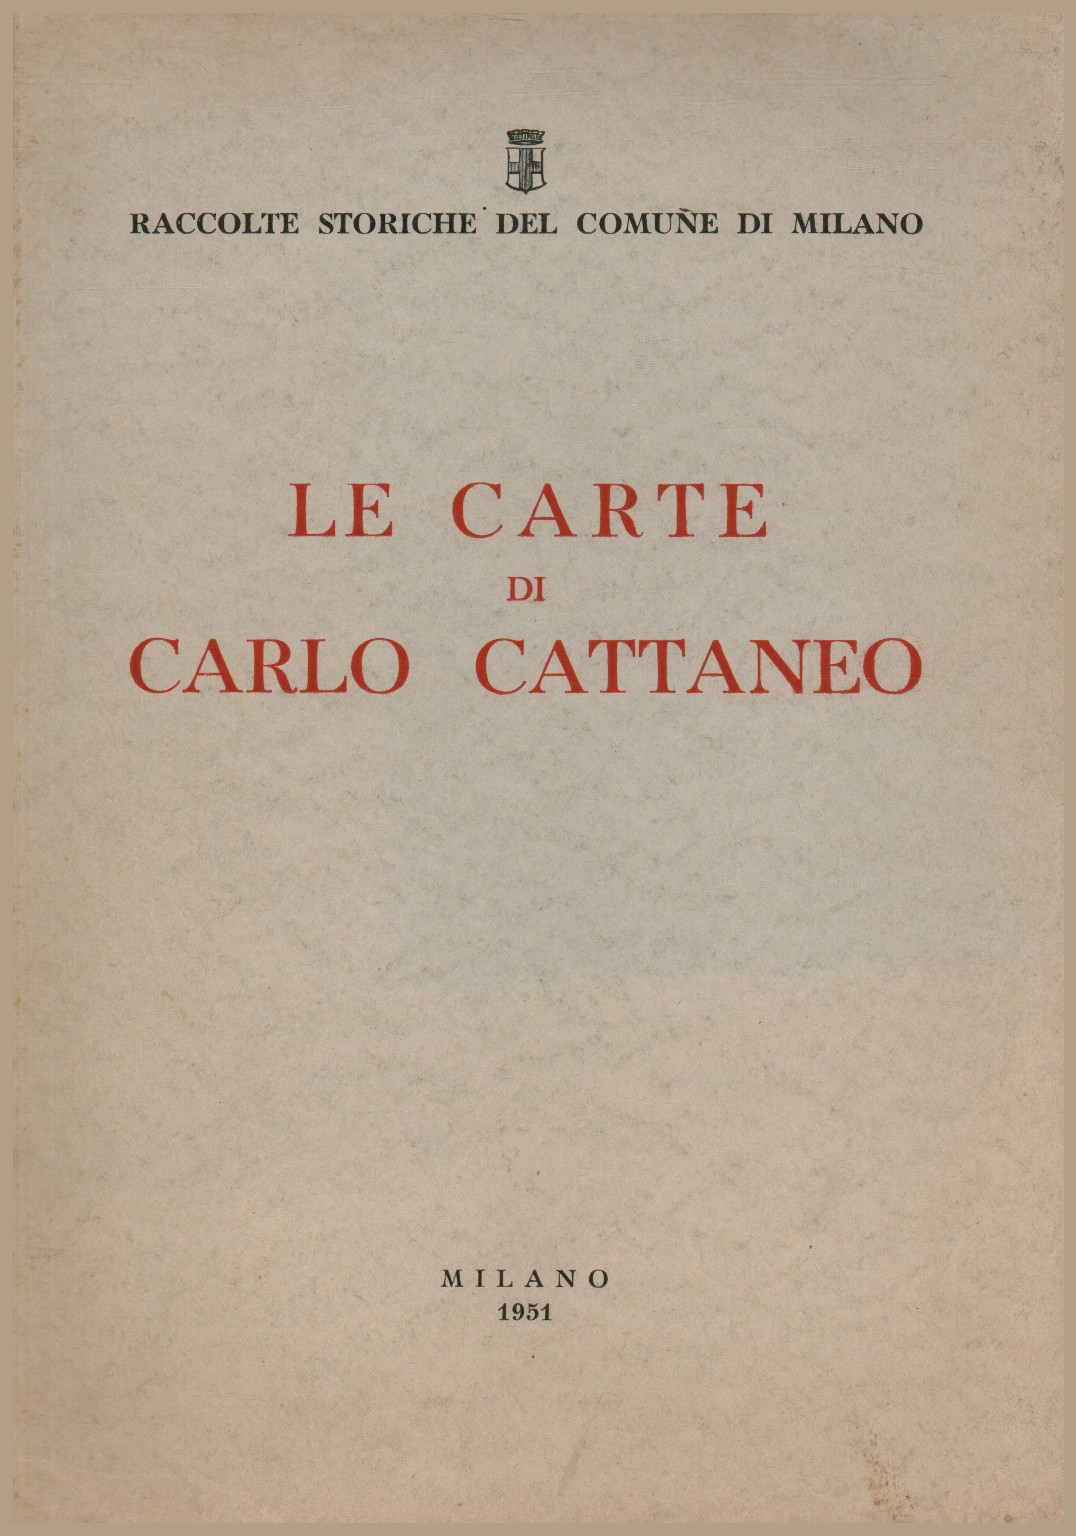 The Cards Carlo Cattaneo, s.a.